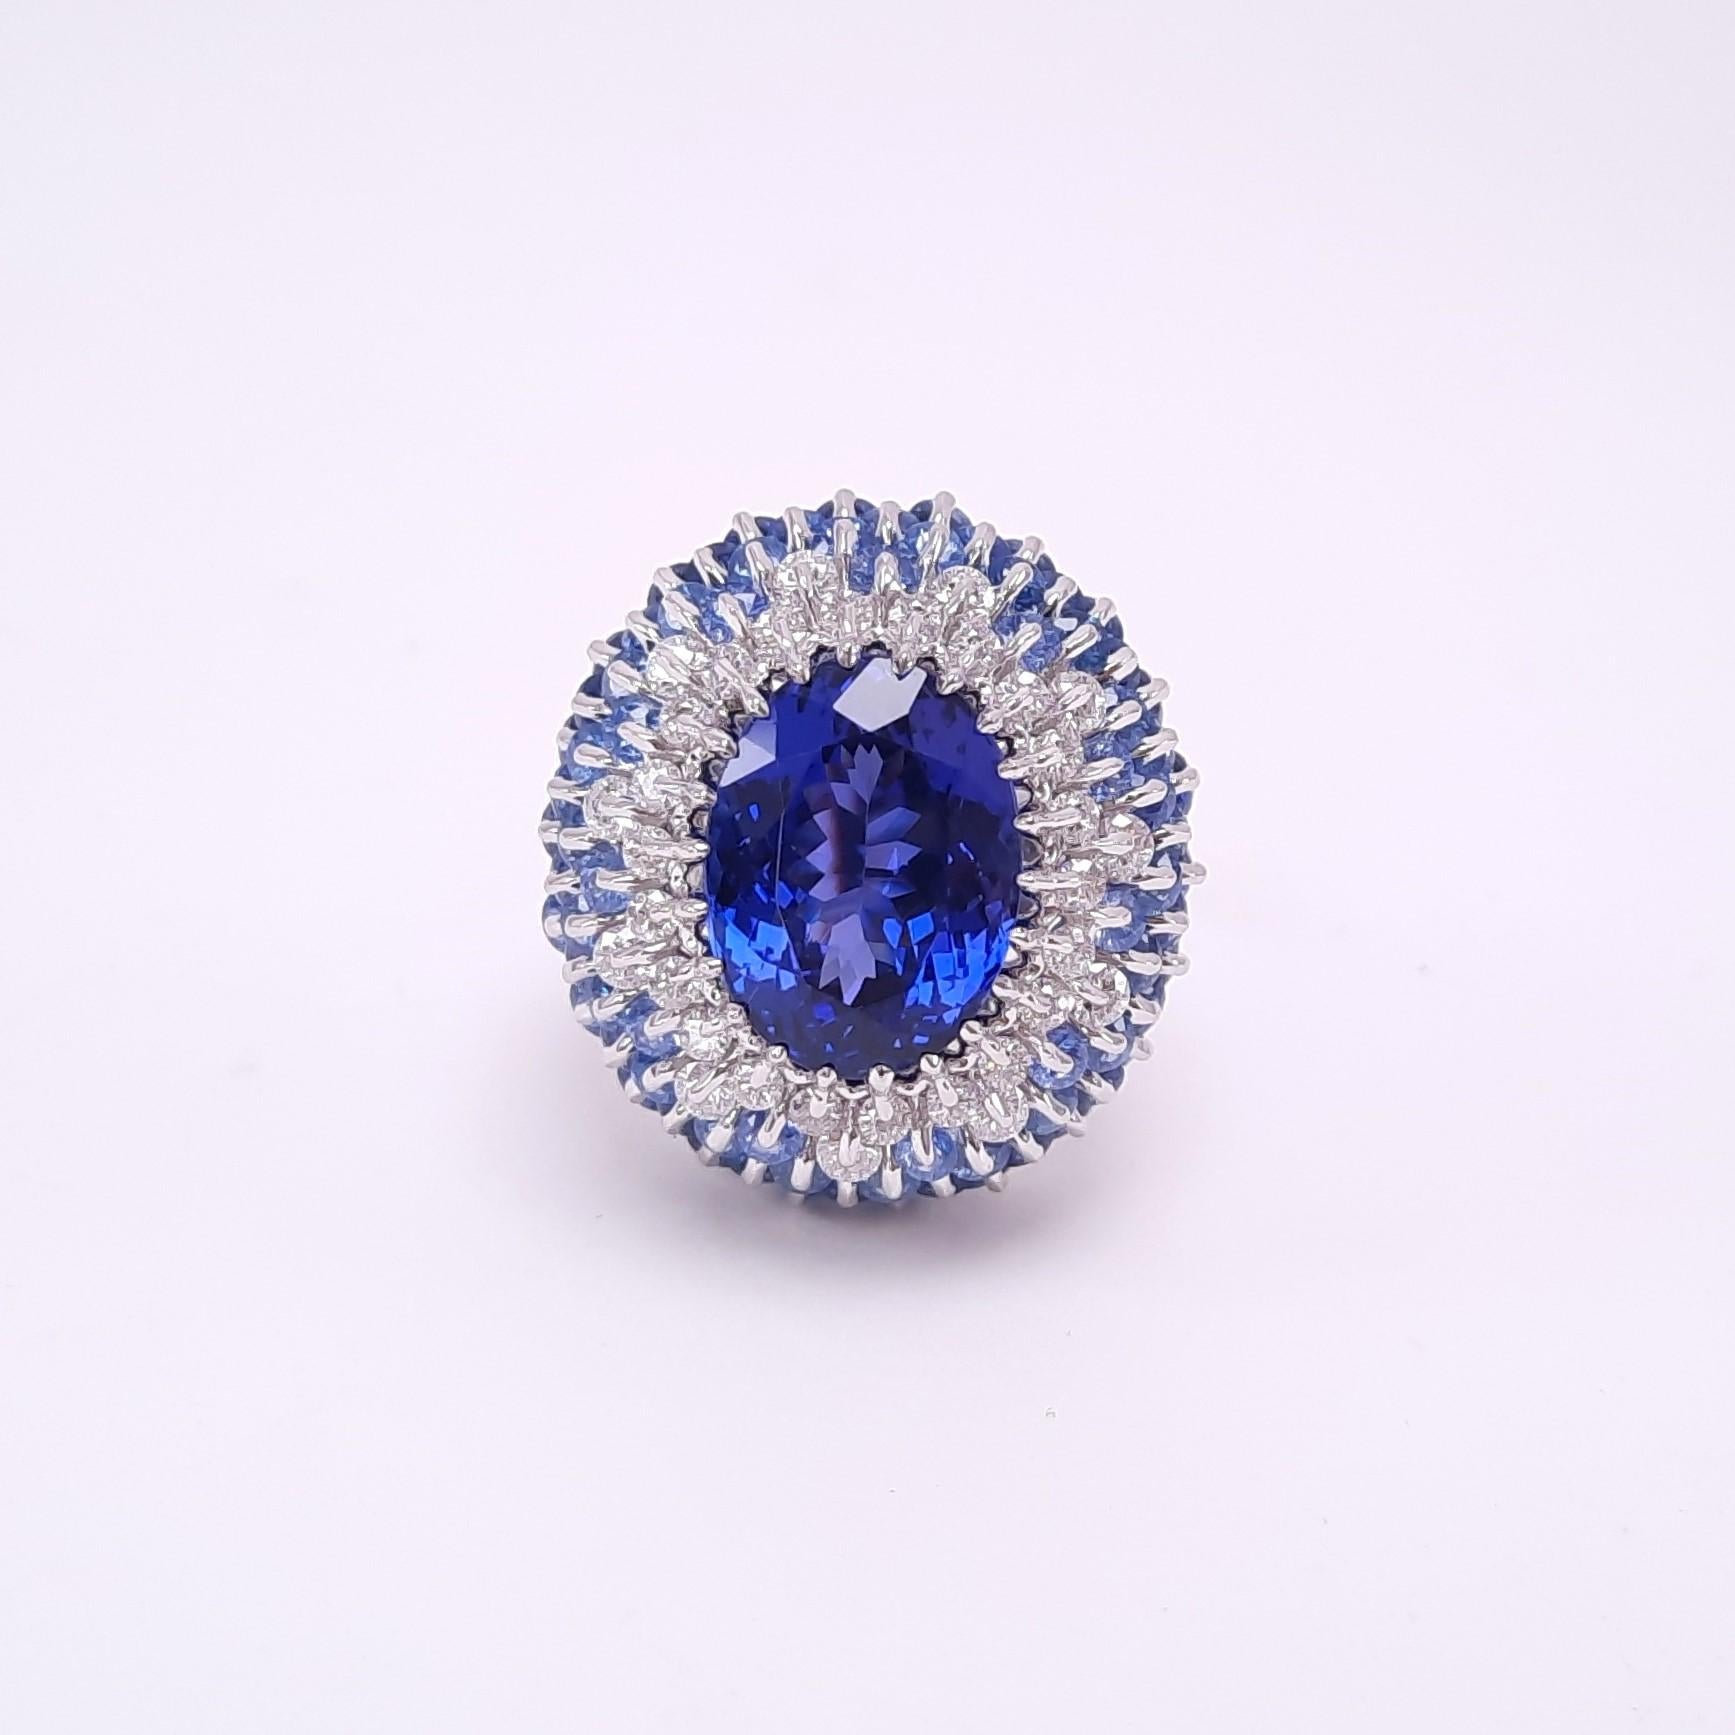 Enjoy our exquisite 9ct Tanzanite Ring from the mesmerising Ball of Colour collection made with Waltzing Brilliance technology. A symphony of elegance and brilliance, this ring features a captivating, vivid tanzanite that commands attention with its